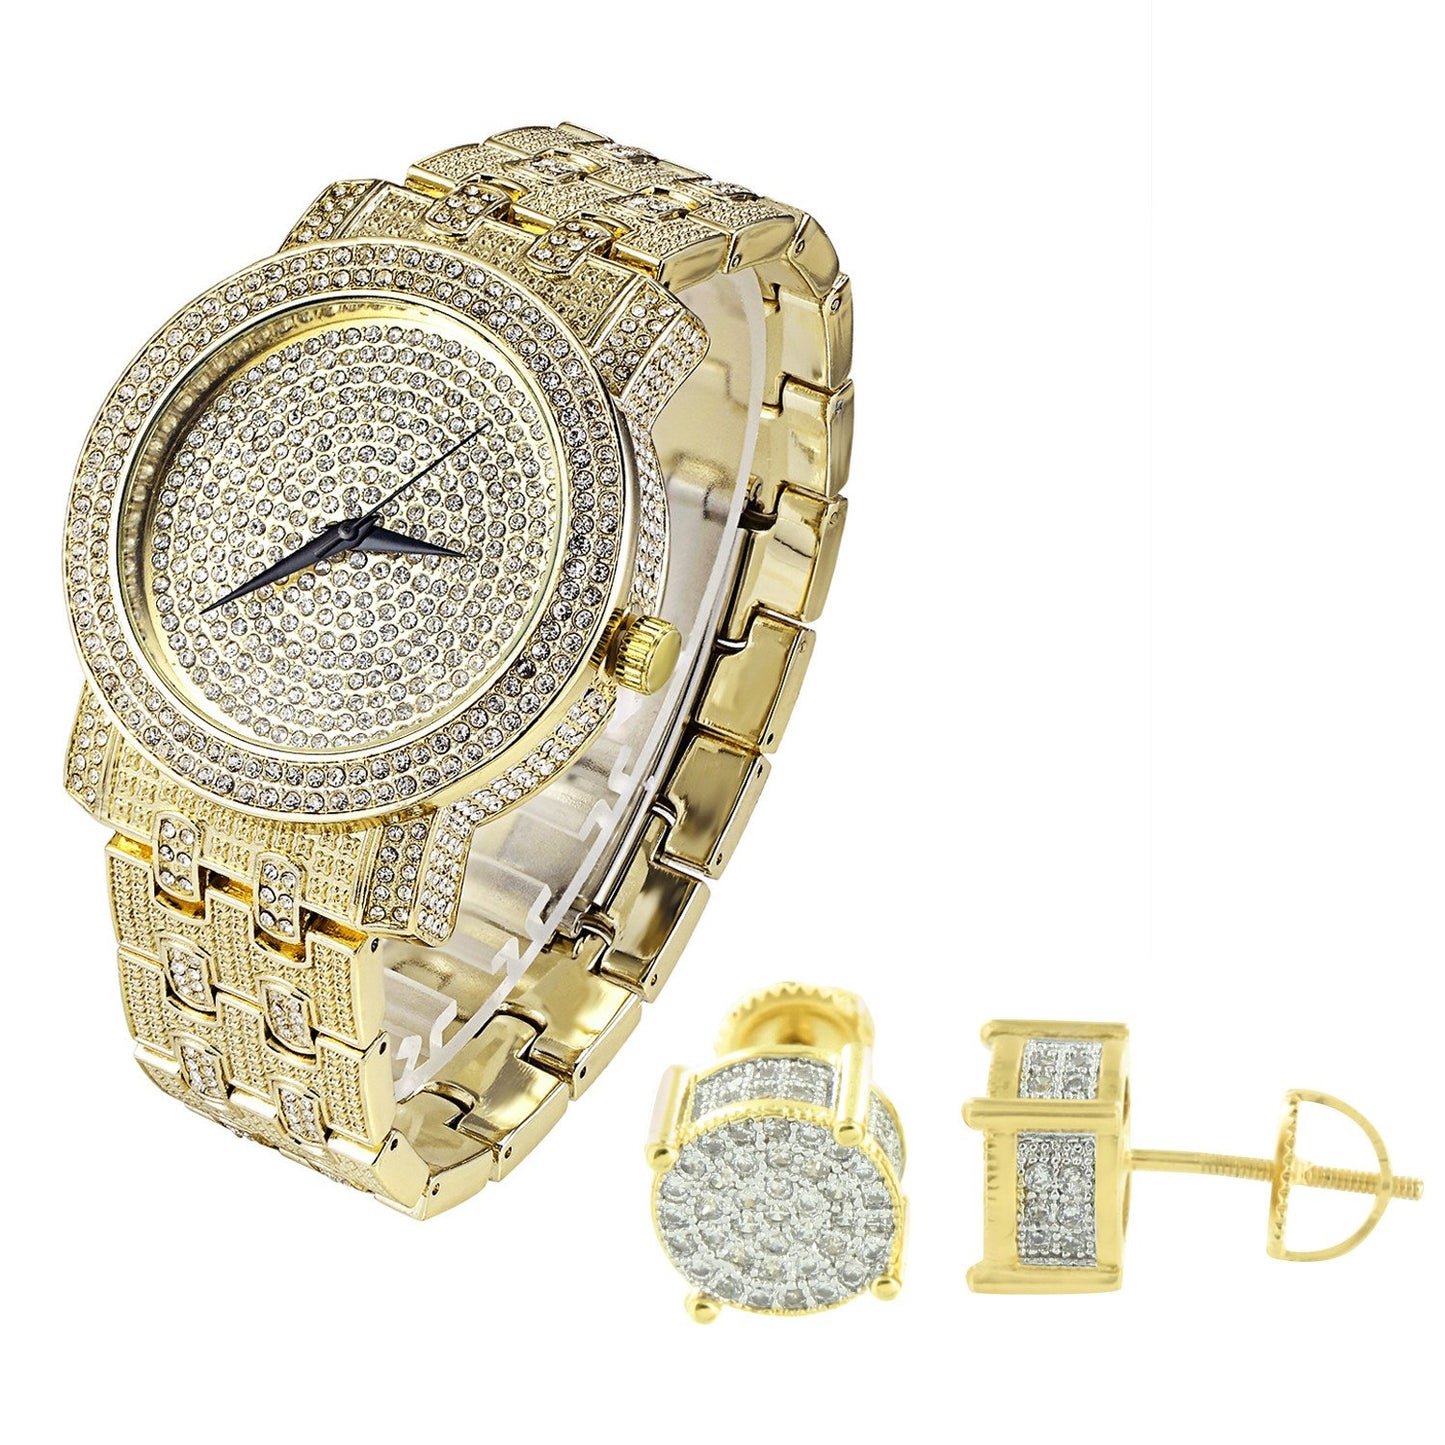 Hip Hop Men's Gold Finish out Watch and Earrings Combo Set